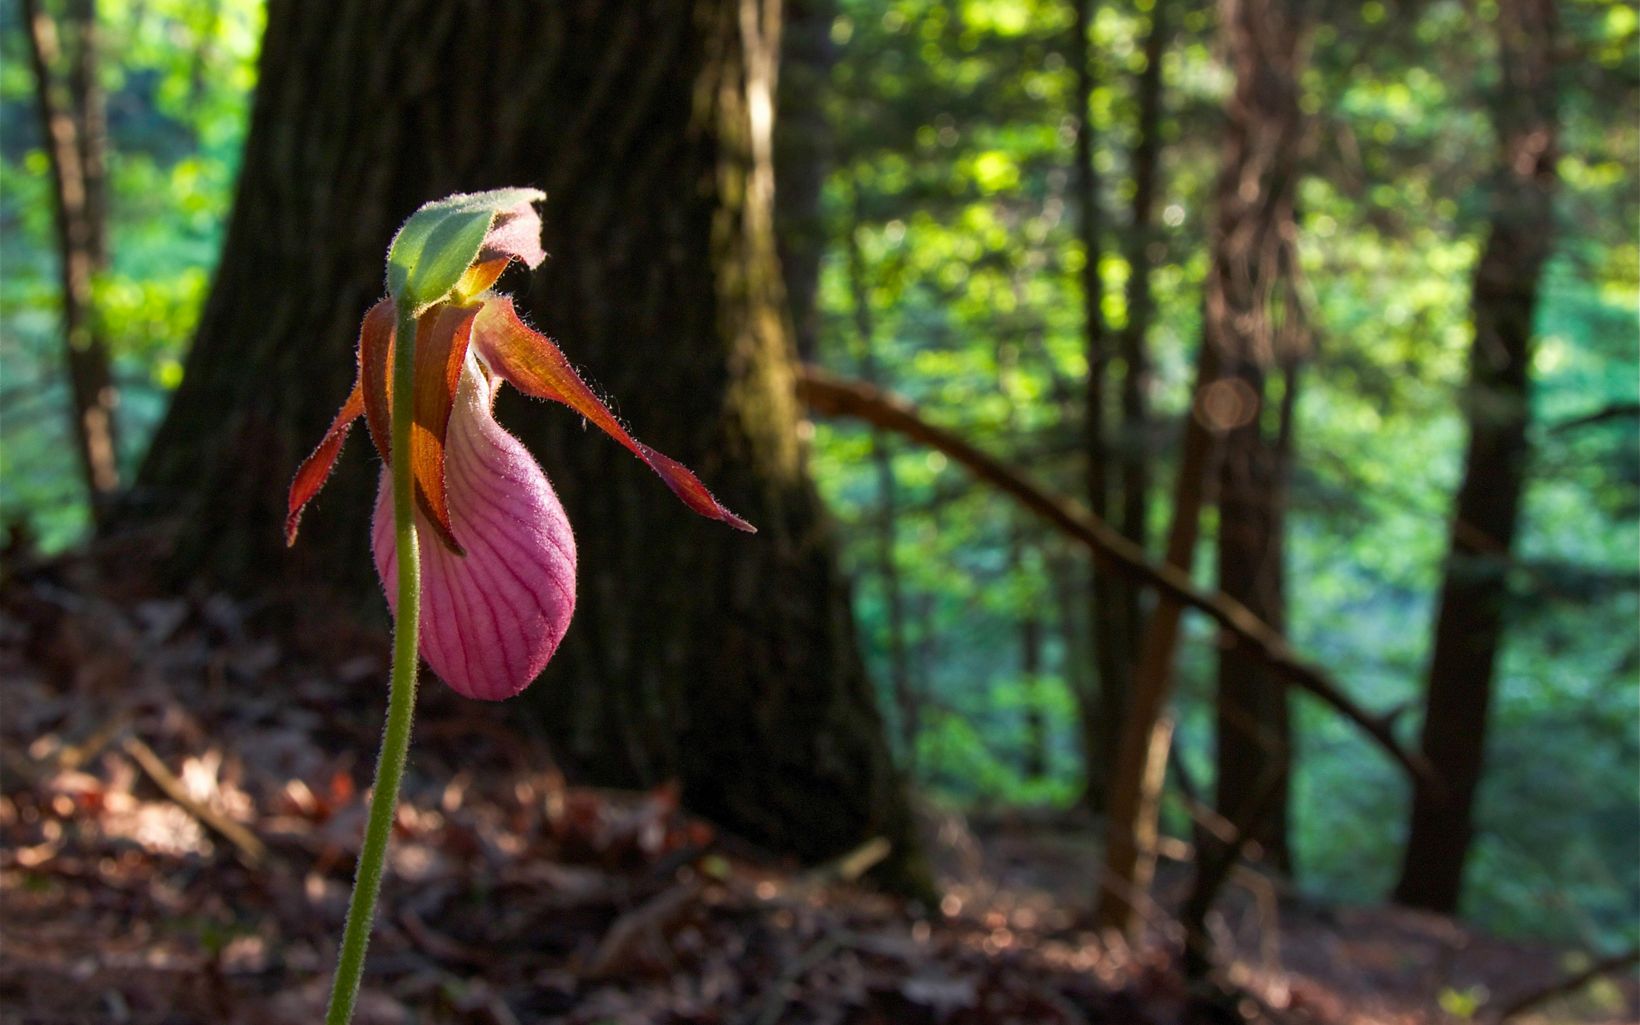 A pink lady slipper flower is blooming in a forest.